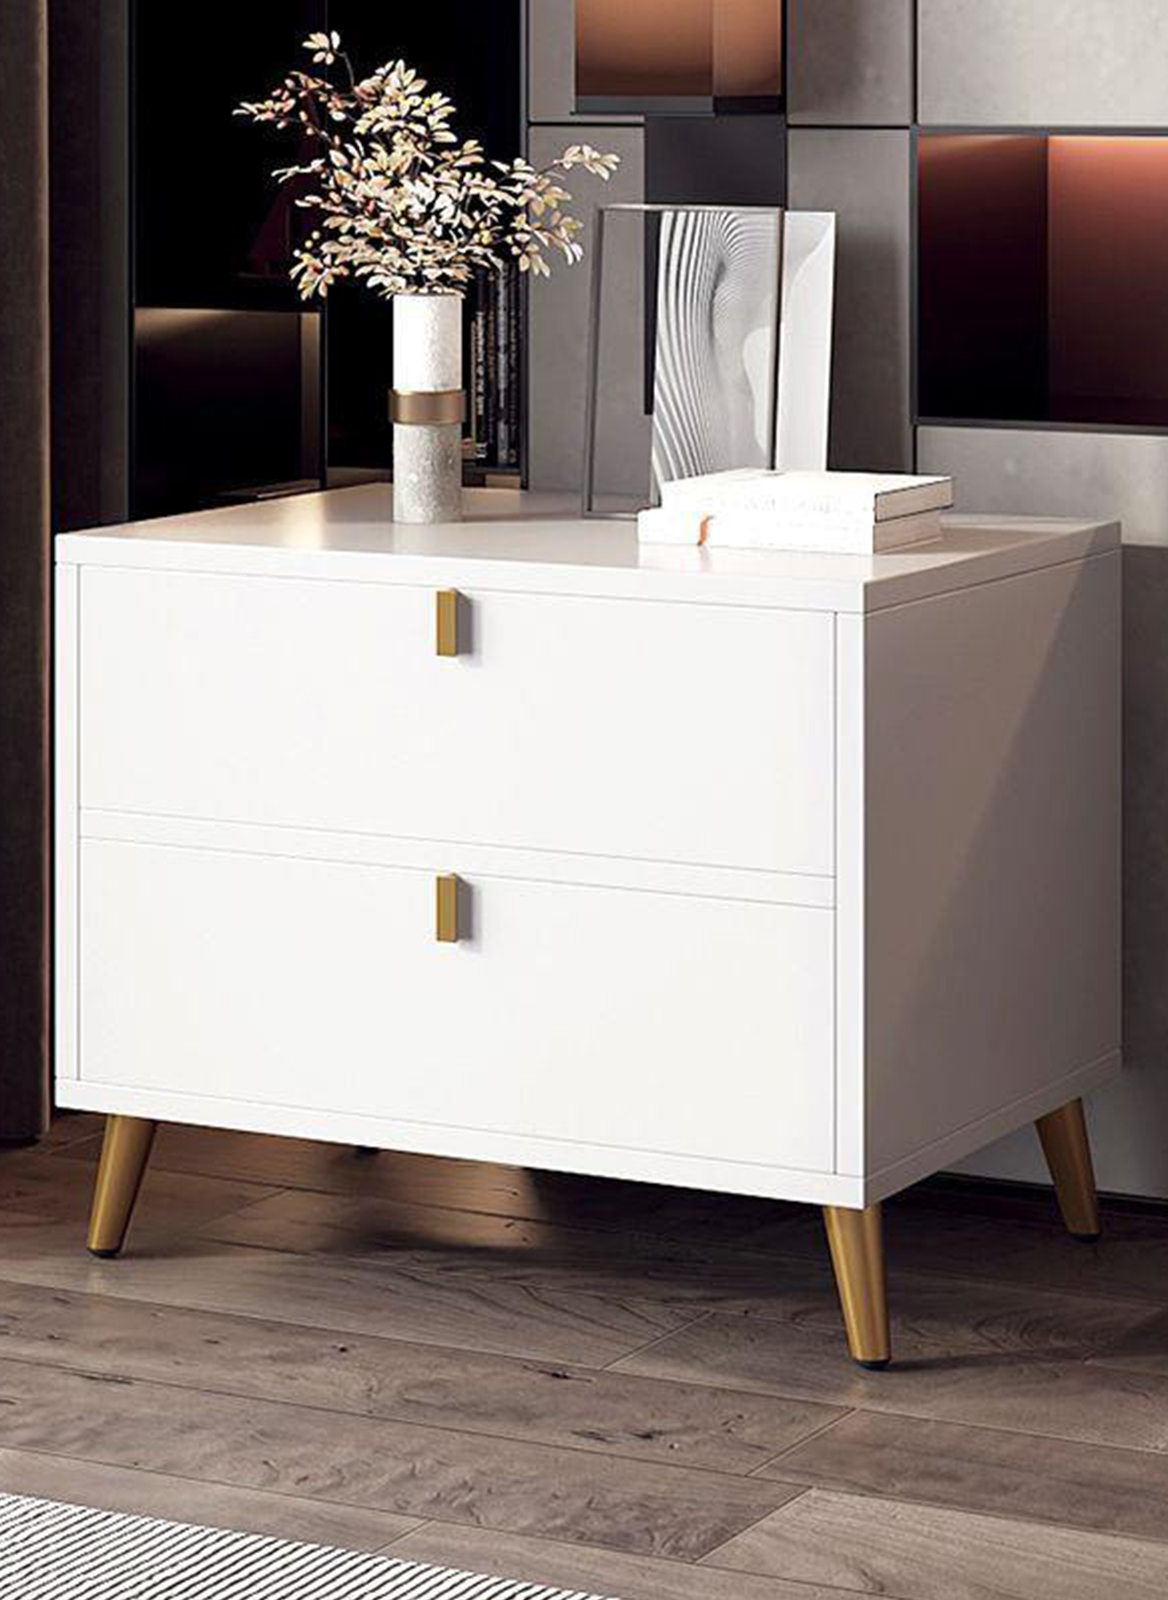 European-style Light Luxury Bedside Table with Drawers 48*40*53cm